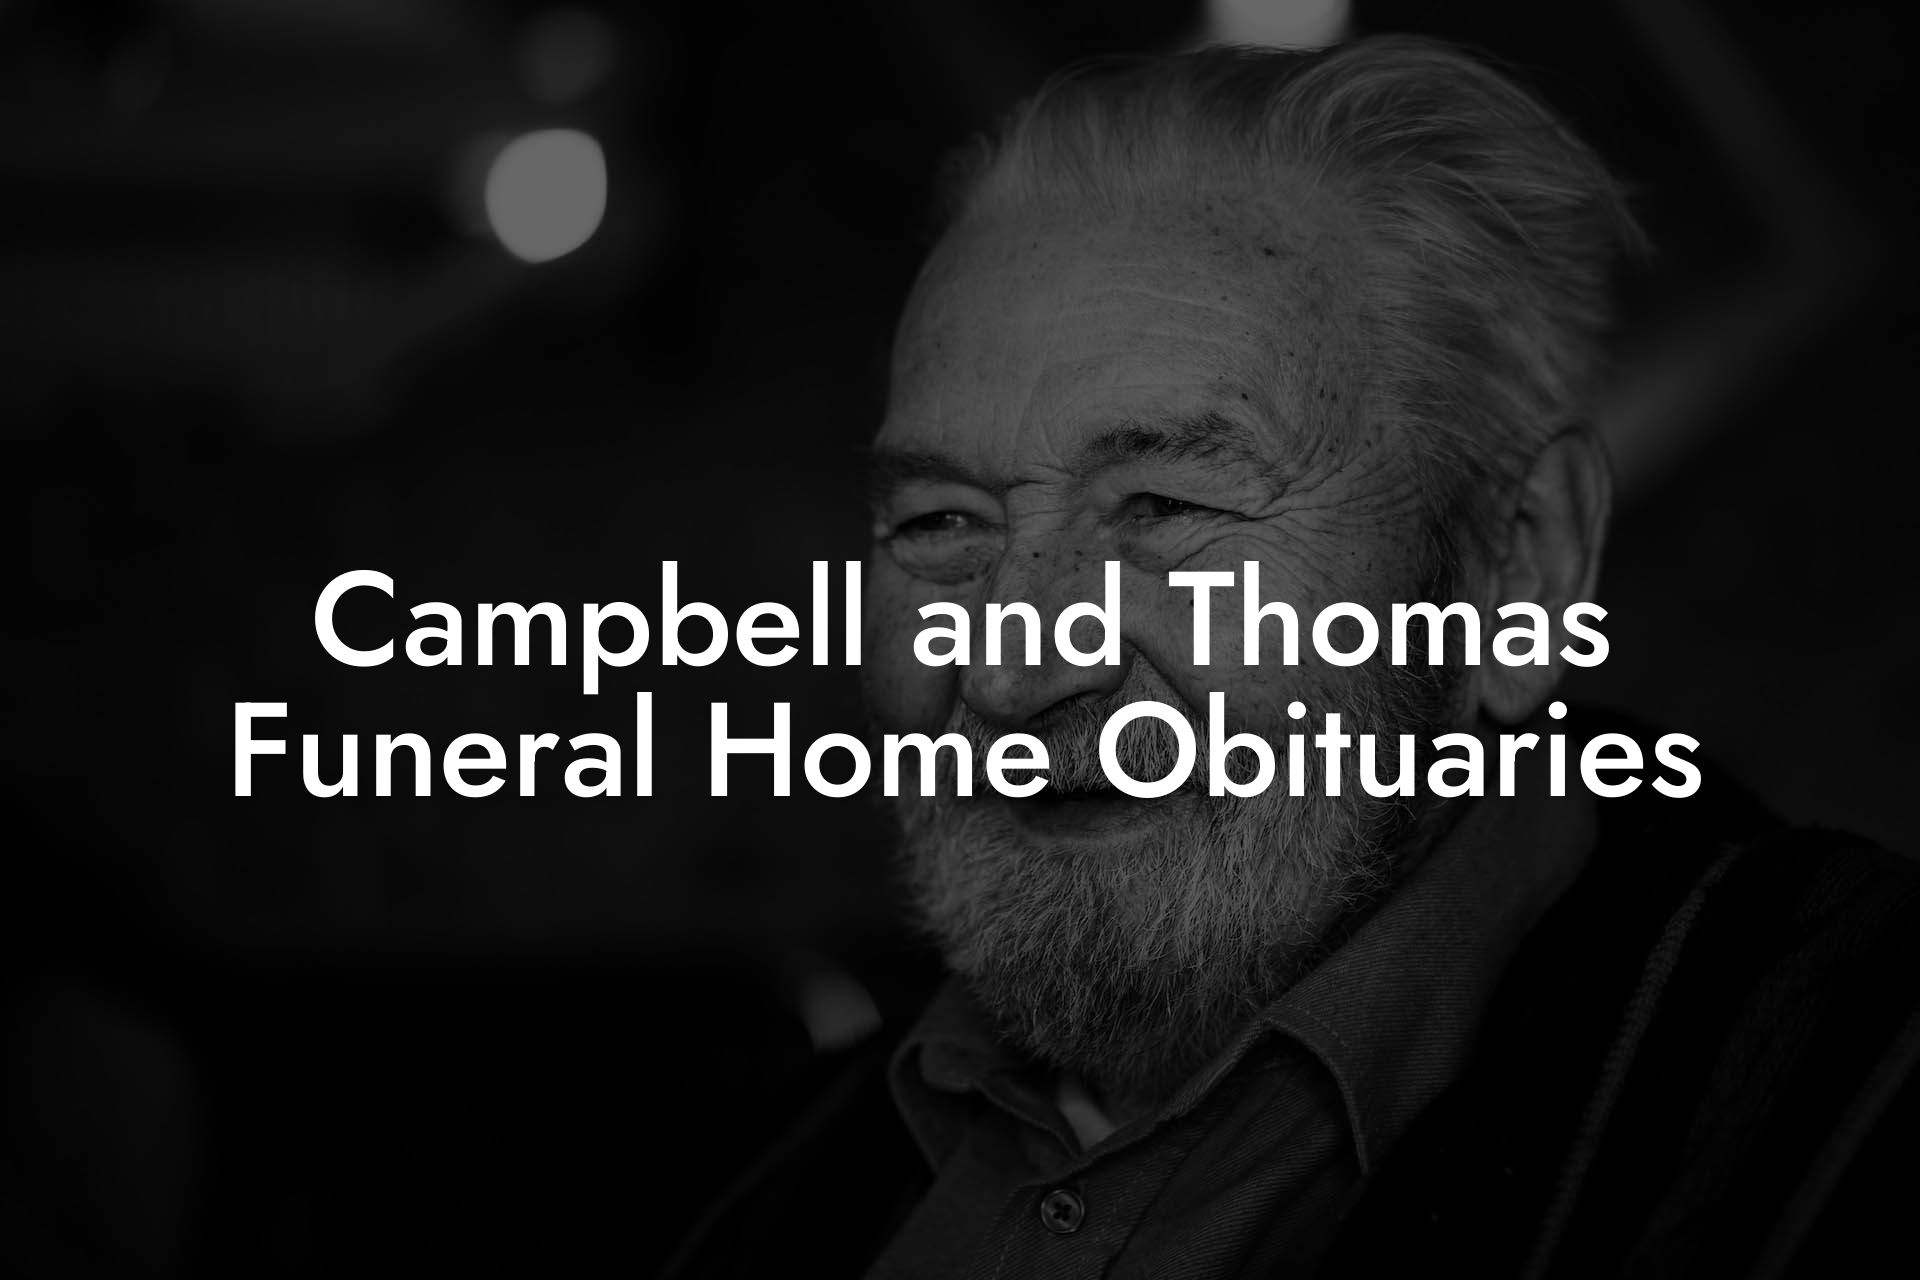 Campbell and Thomas Funeral Home Obituaries